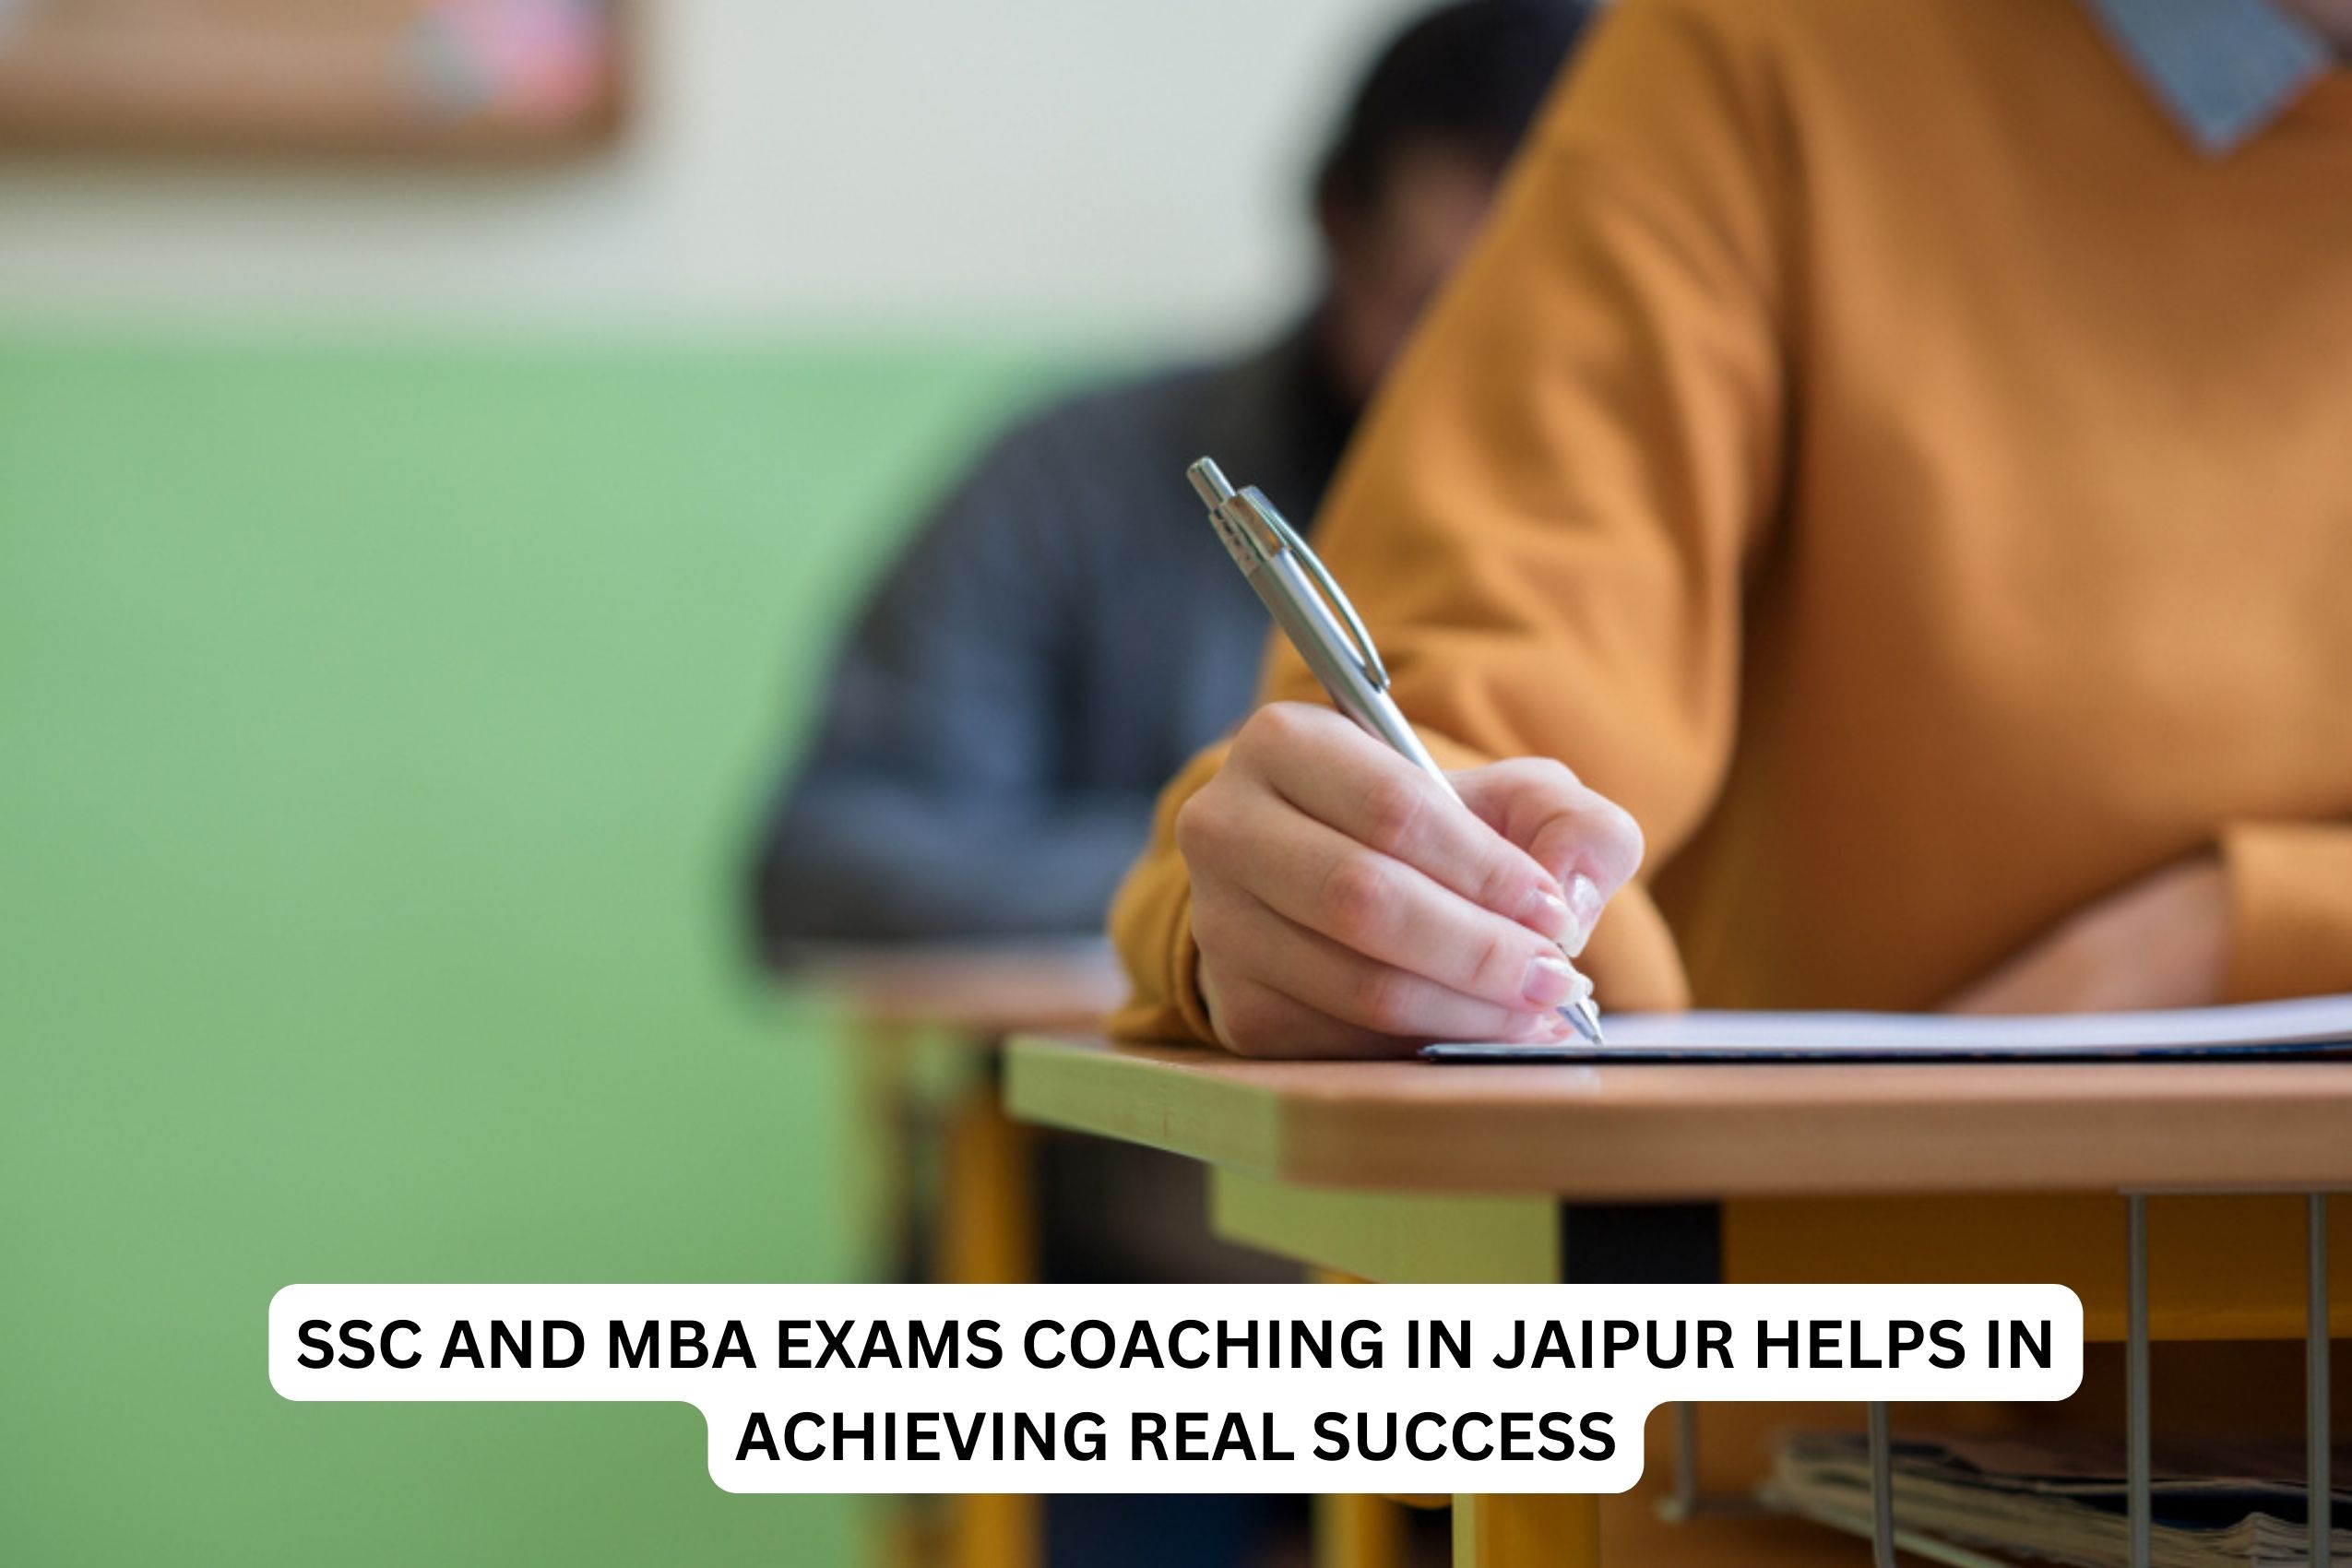 SSC and MBA Exams Coaching in Jaipur Helps in Achieving Real Success